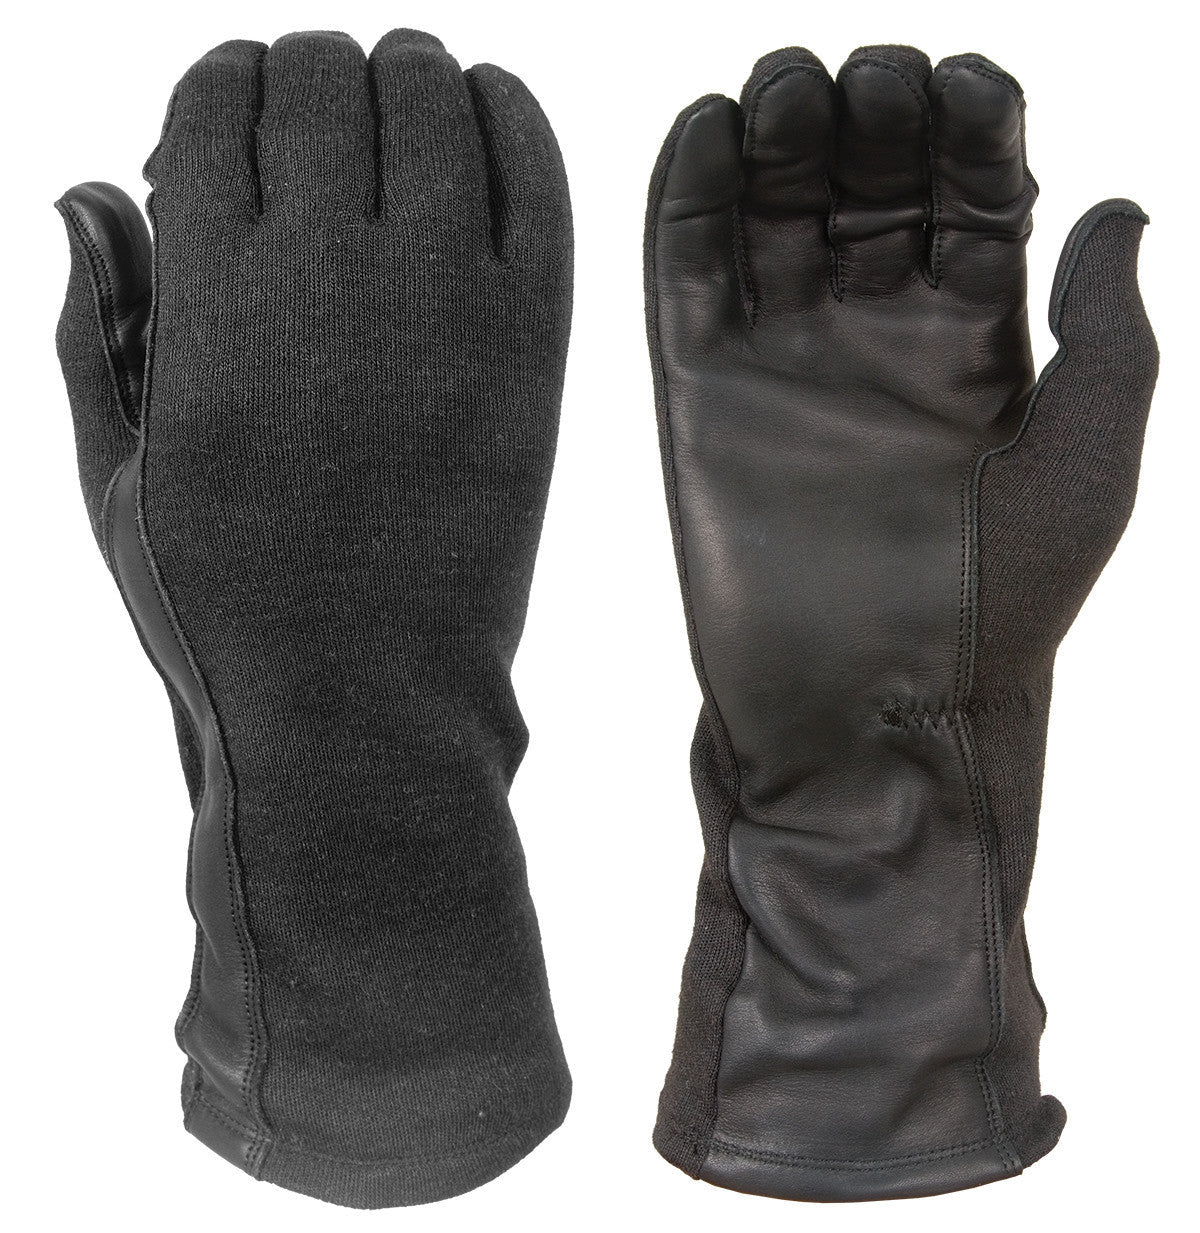 Damascus Flight Gloves with Nomex and Leather Palms